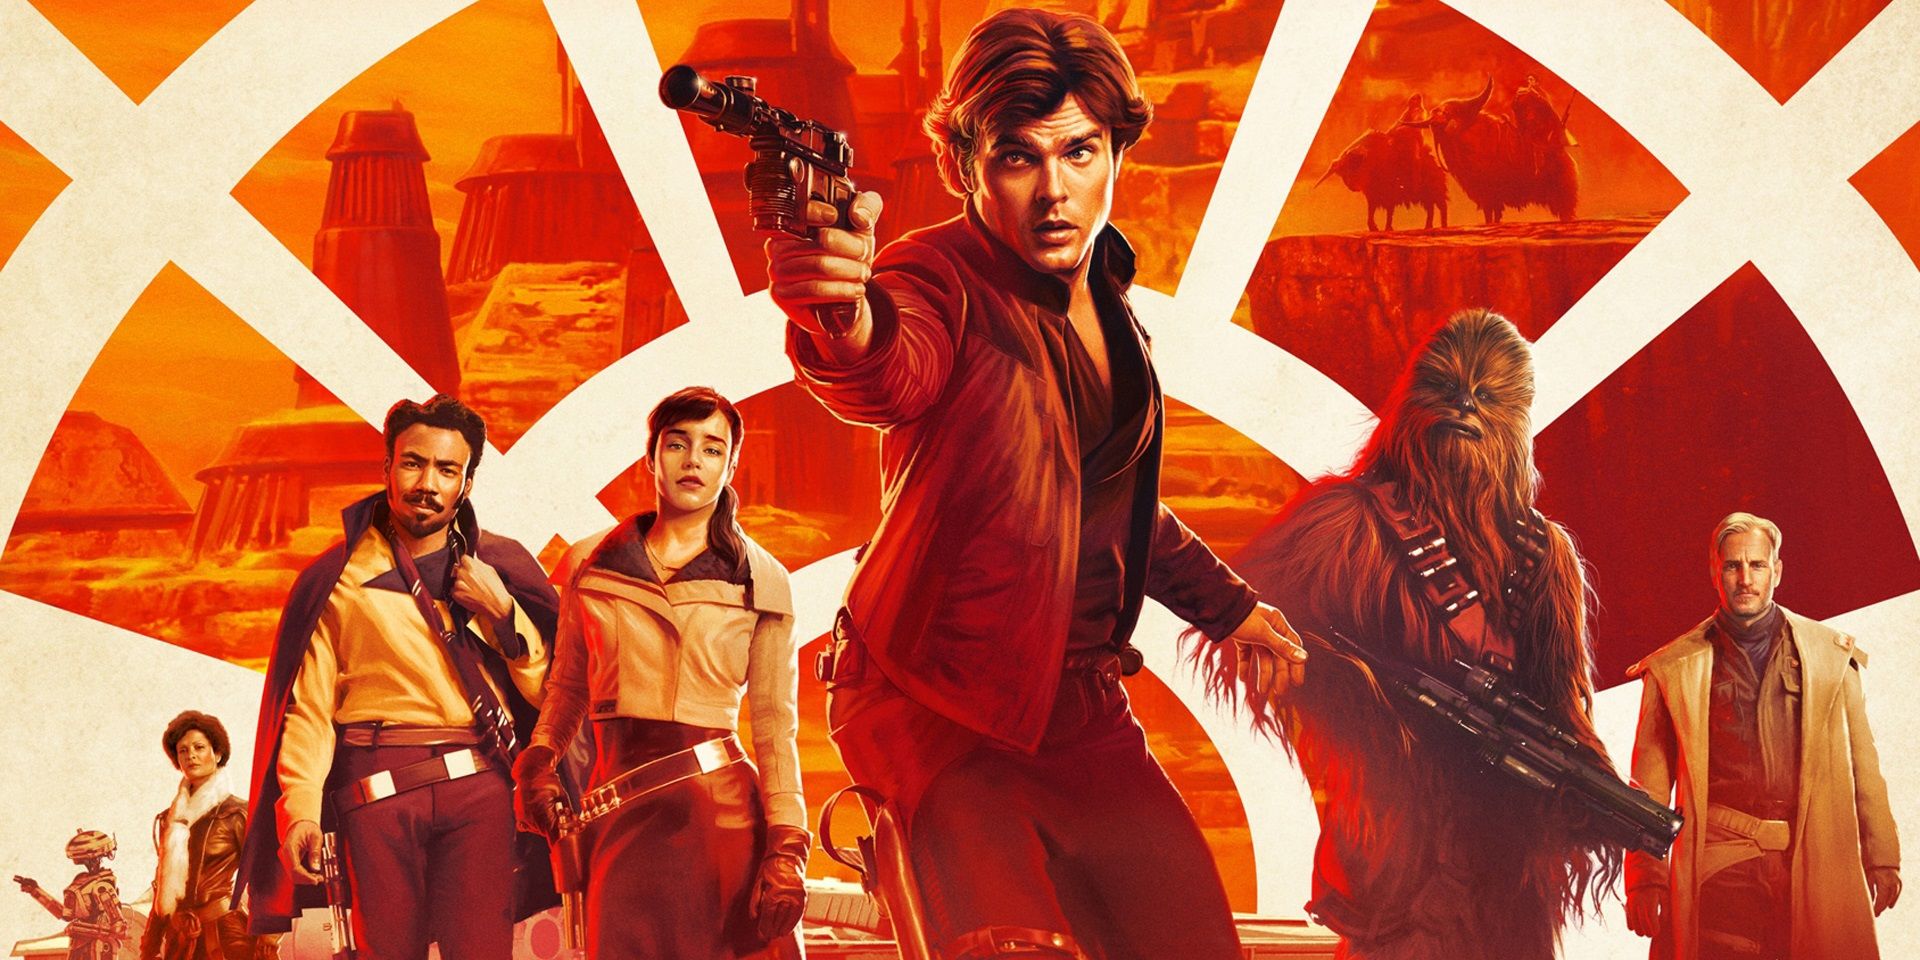 The poster for Solo A Star Wars Story